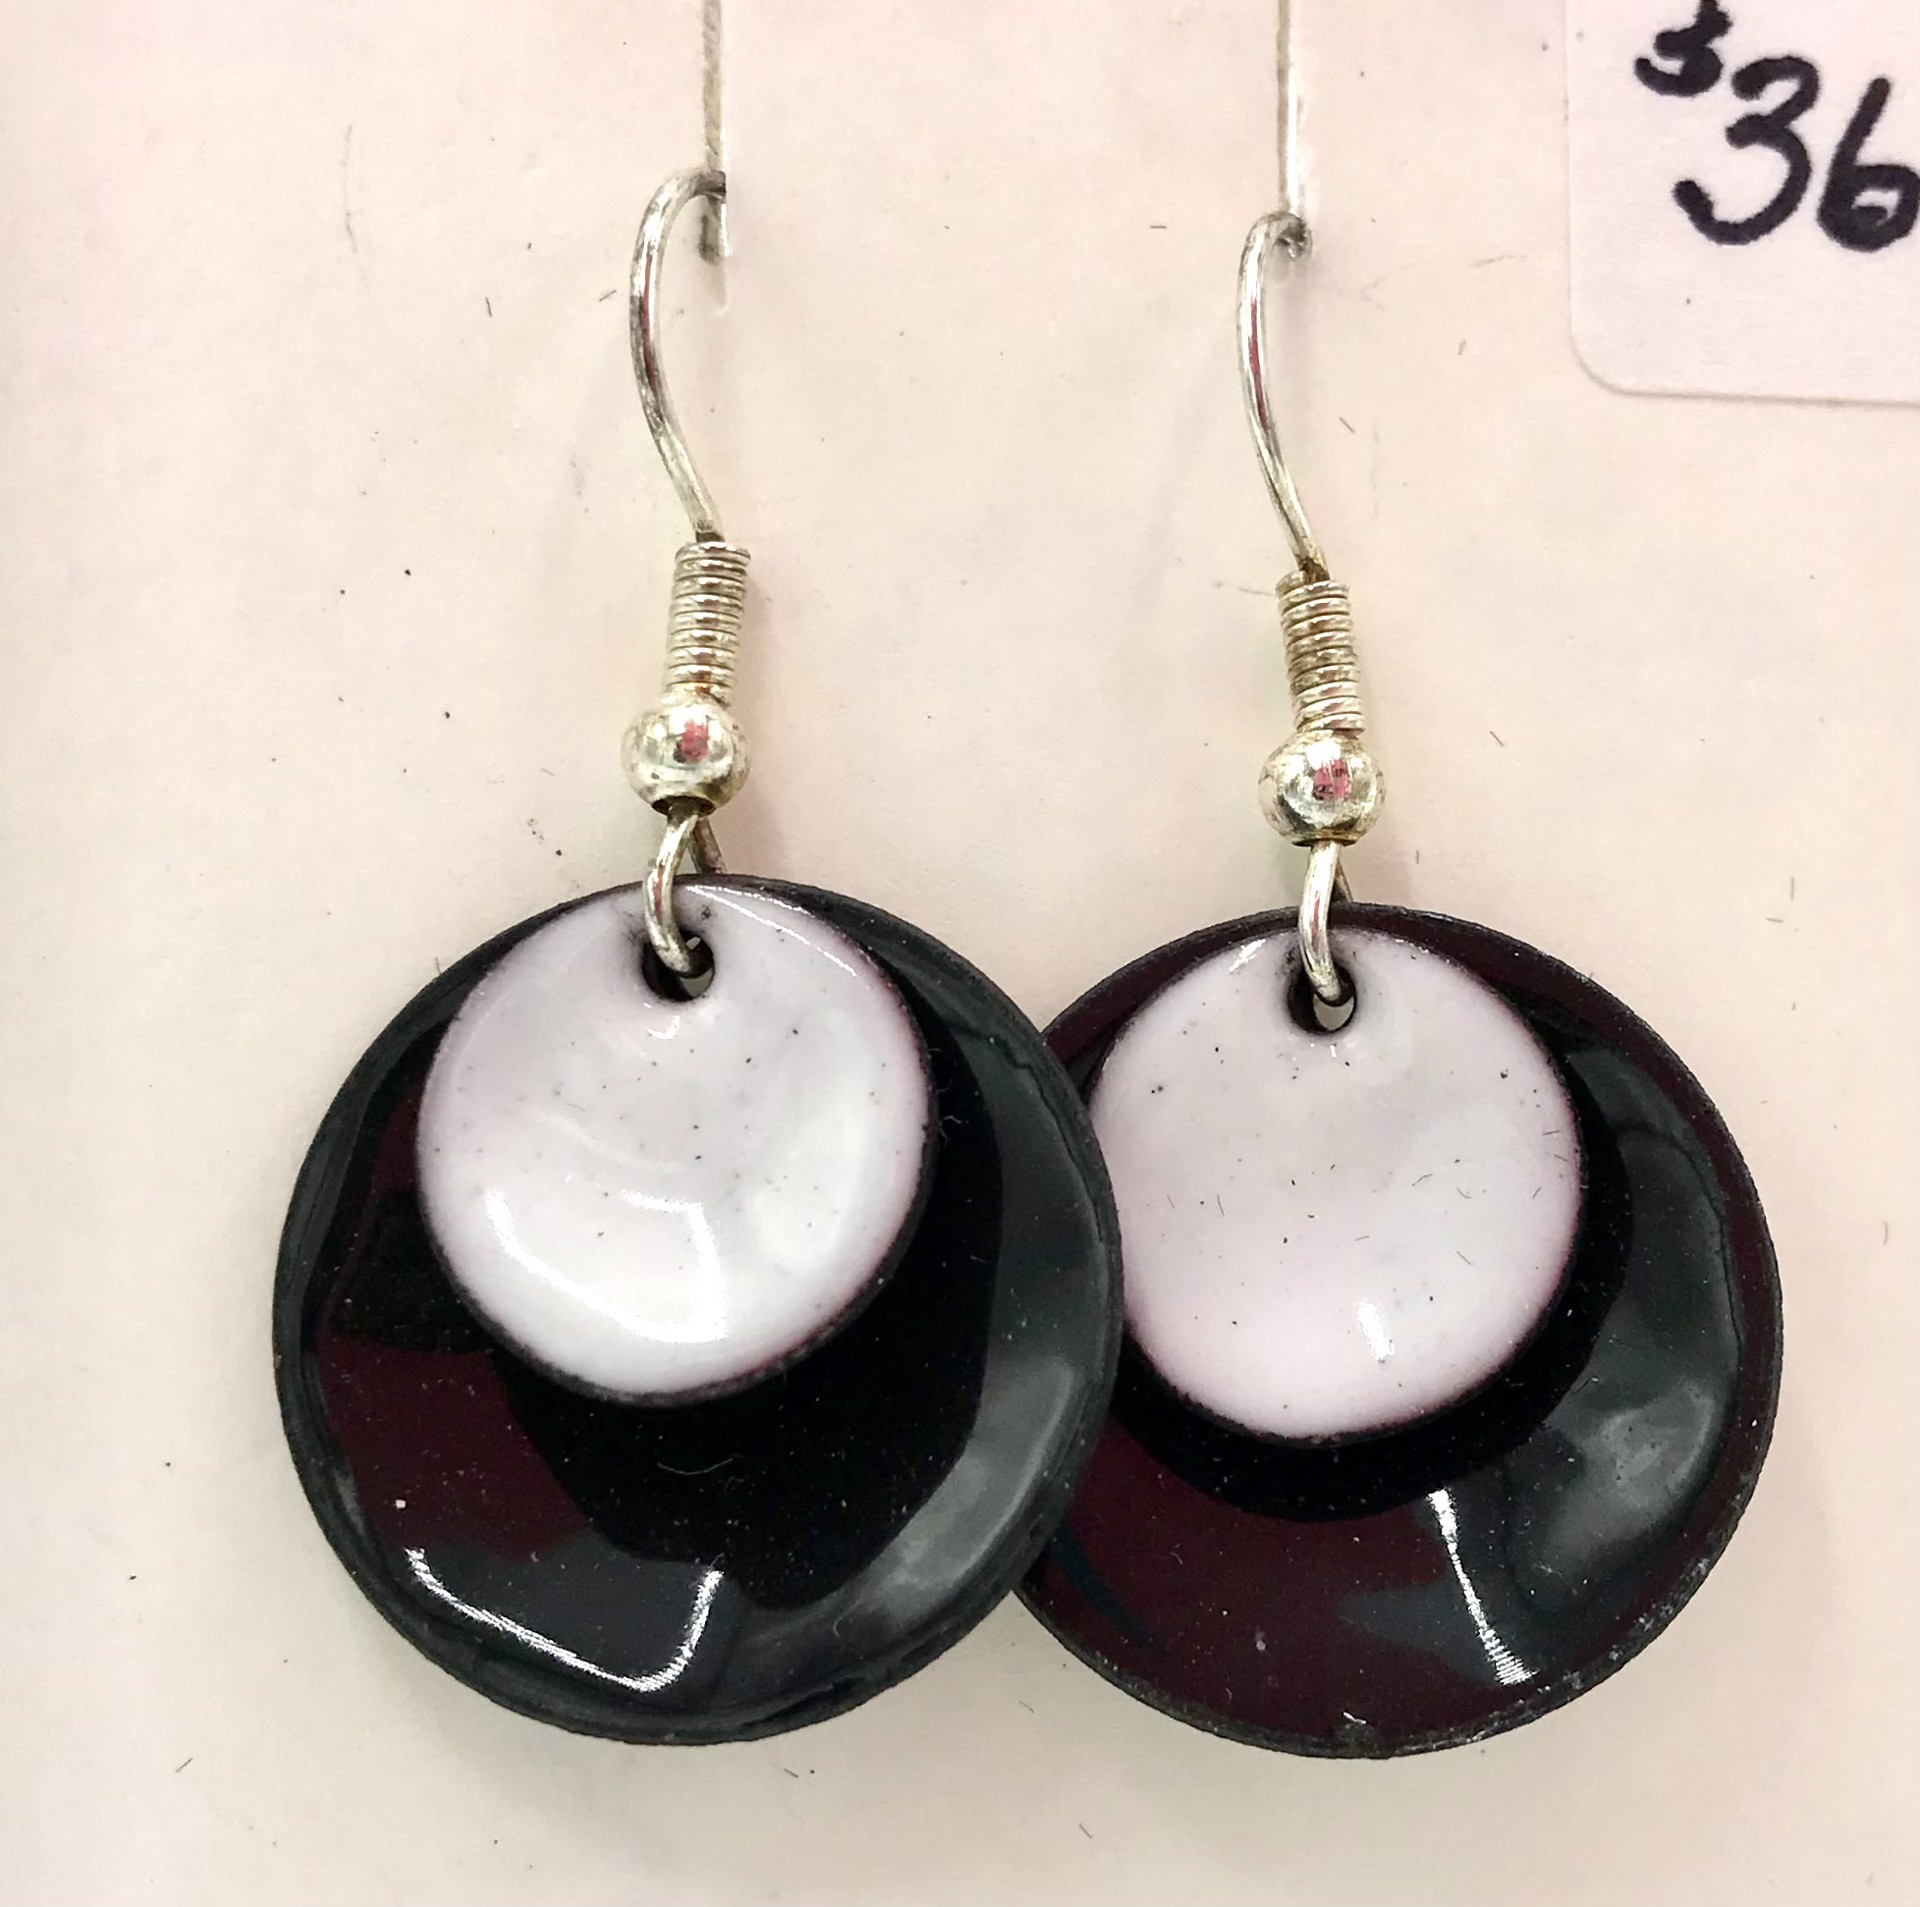 Earrings- Black & White Circles by Cathy Talbot